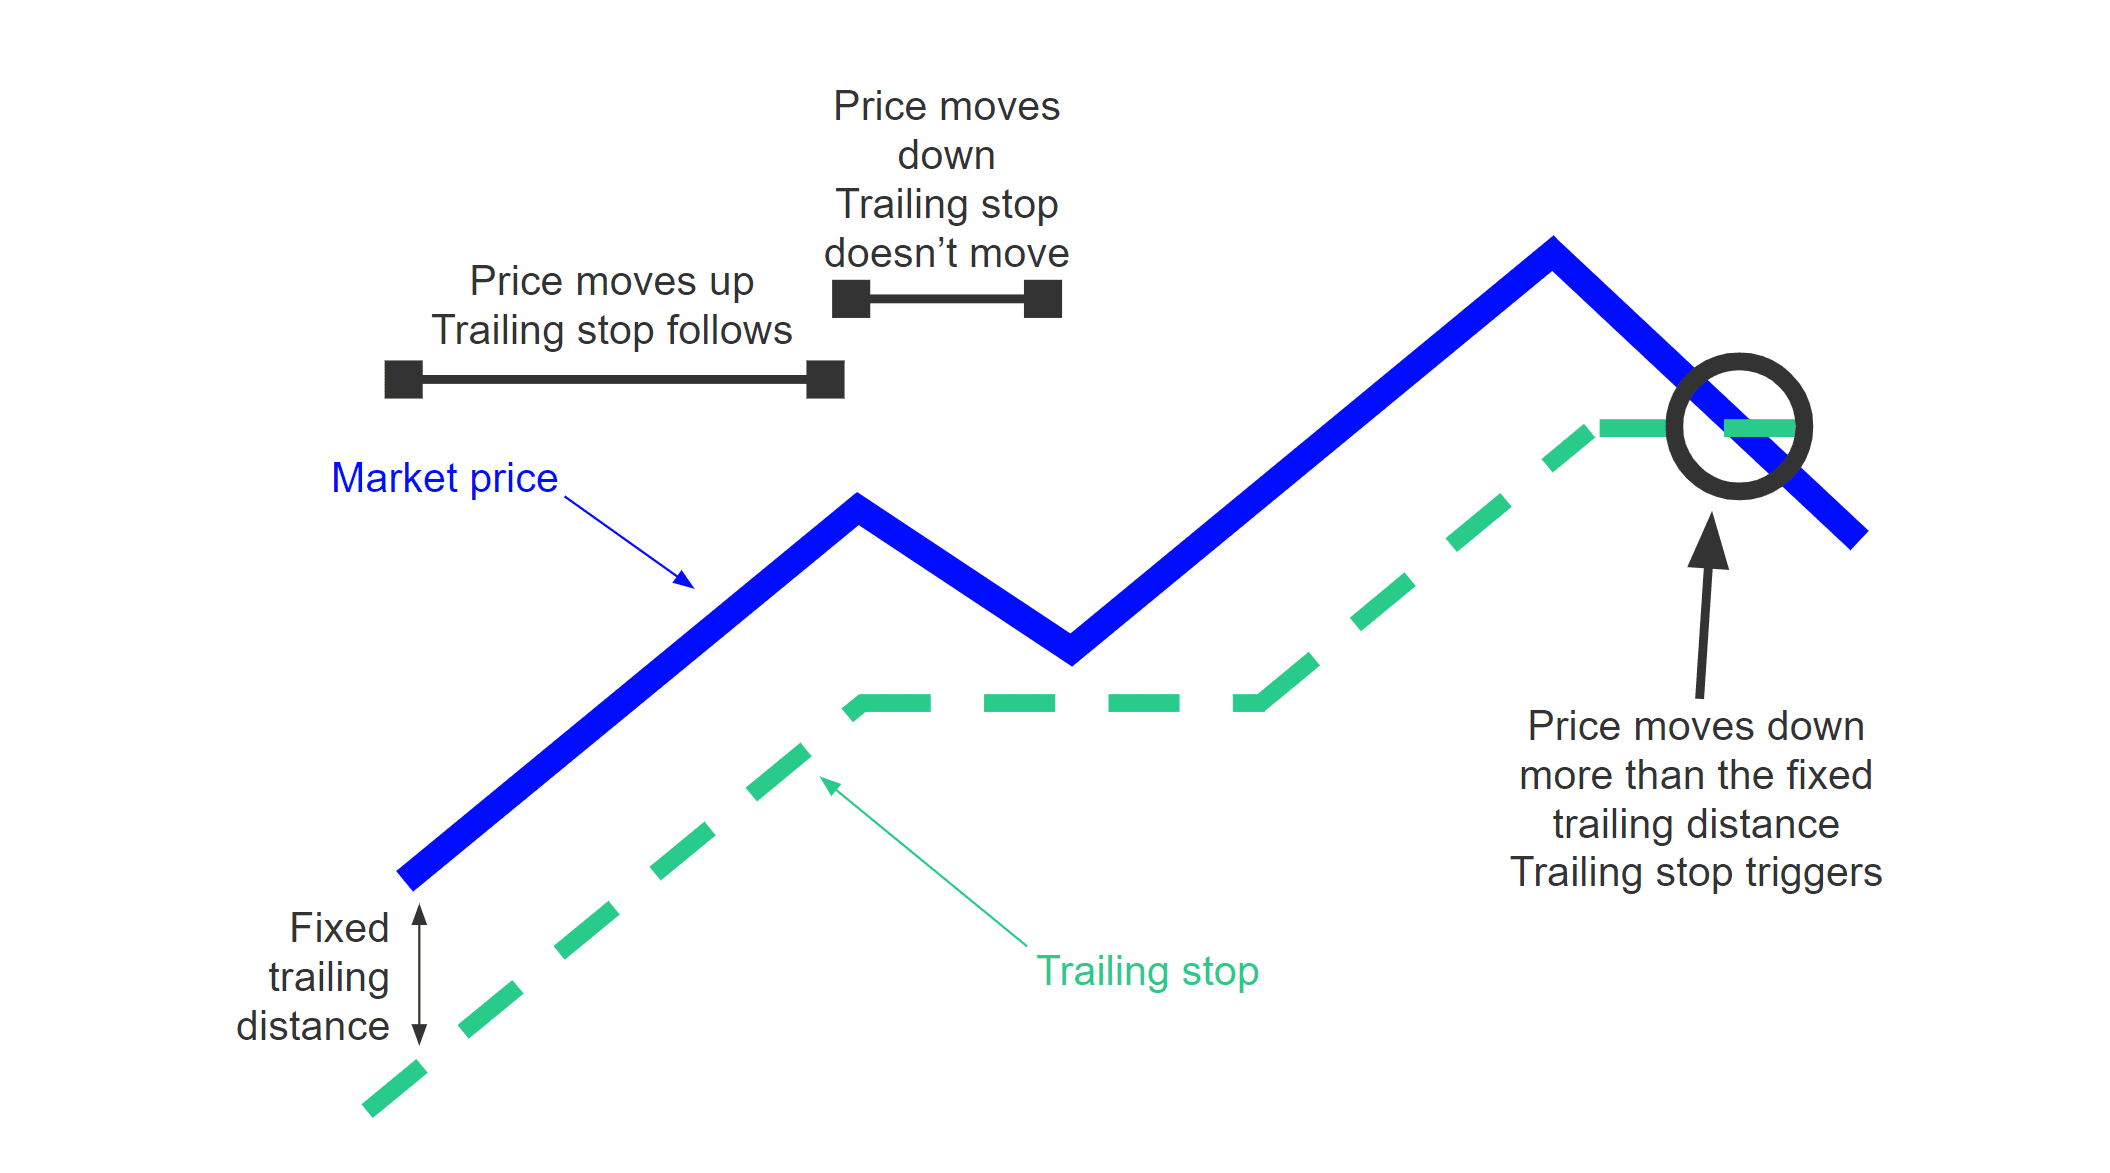 Trailing stop